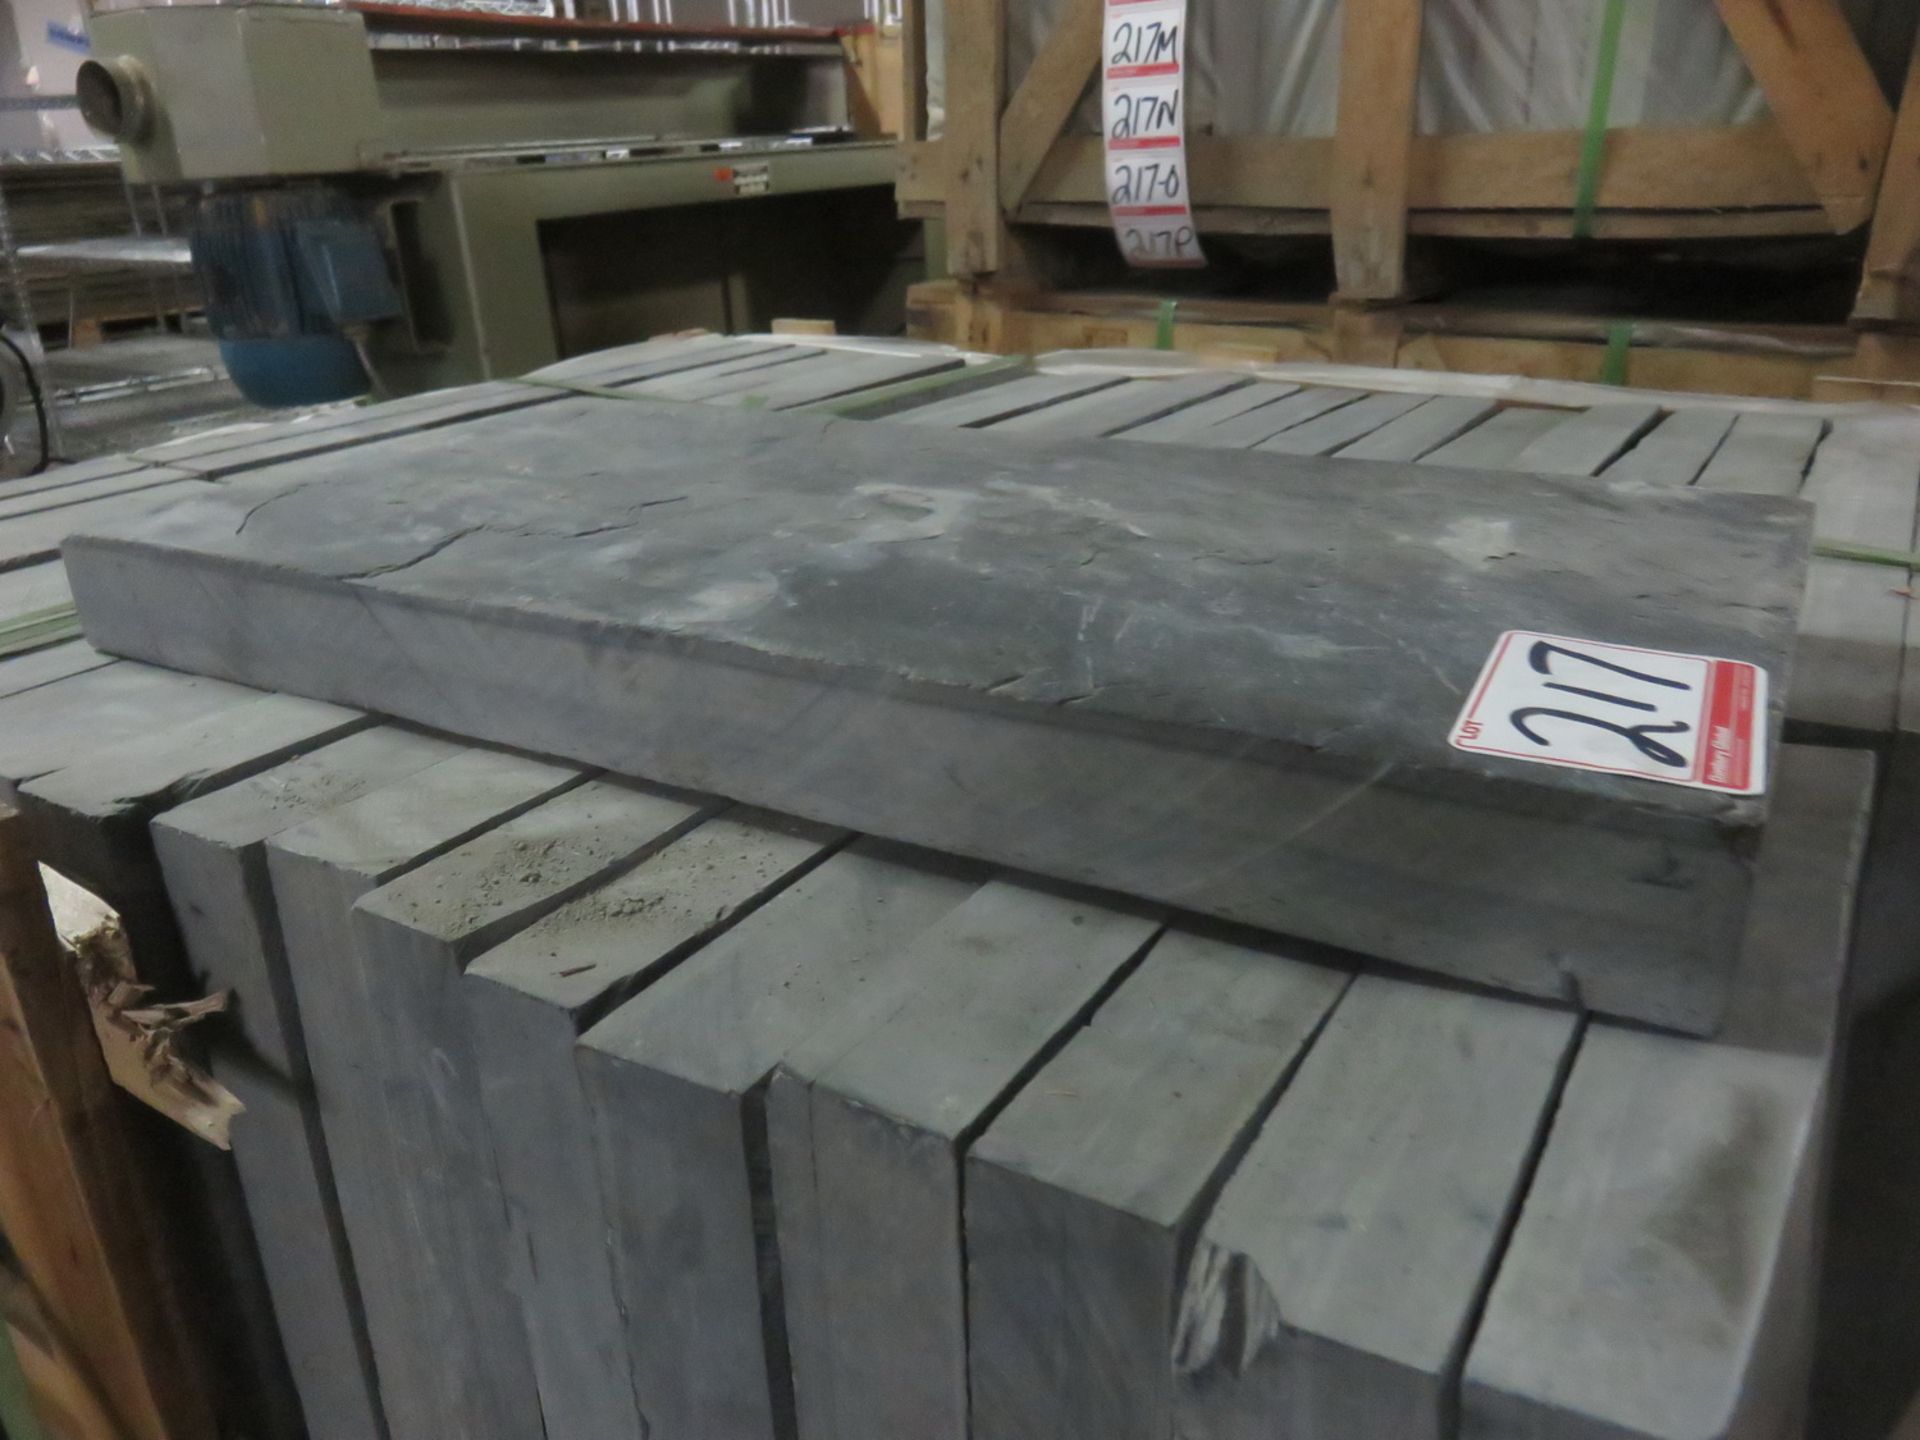 SKID - GREY APPROX 11 3/4" X 23 3/4" X 1 3/4"-2" NATURAL STONE SLABS (1 SKID - APPROX 63 PCS) - Image 2 of 2